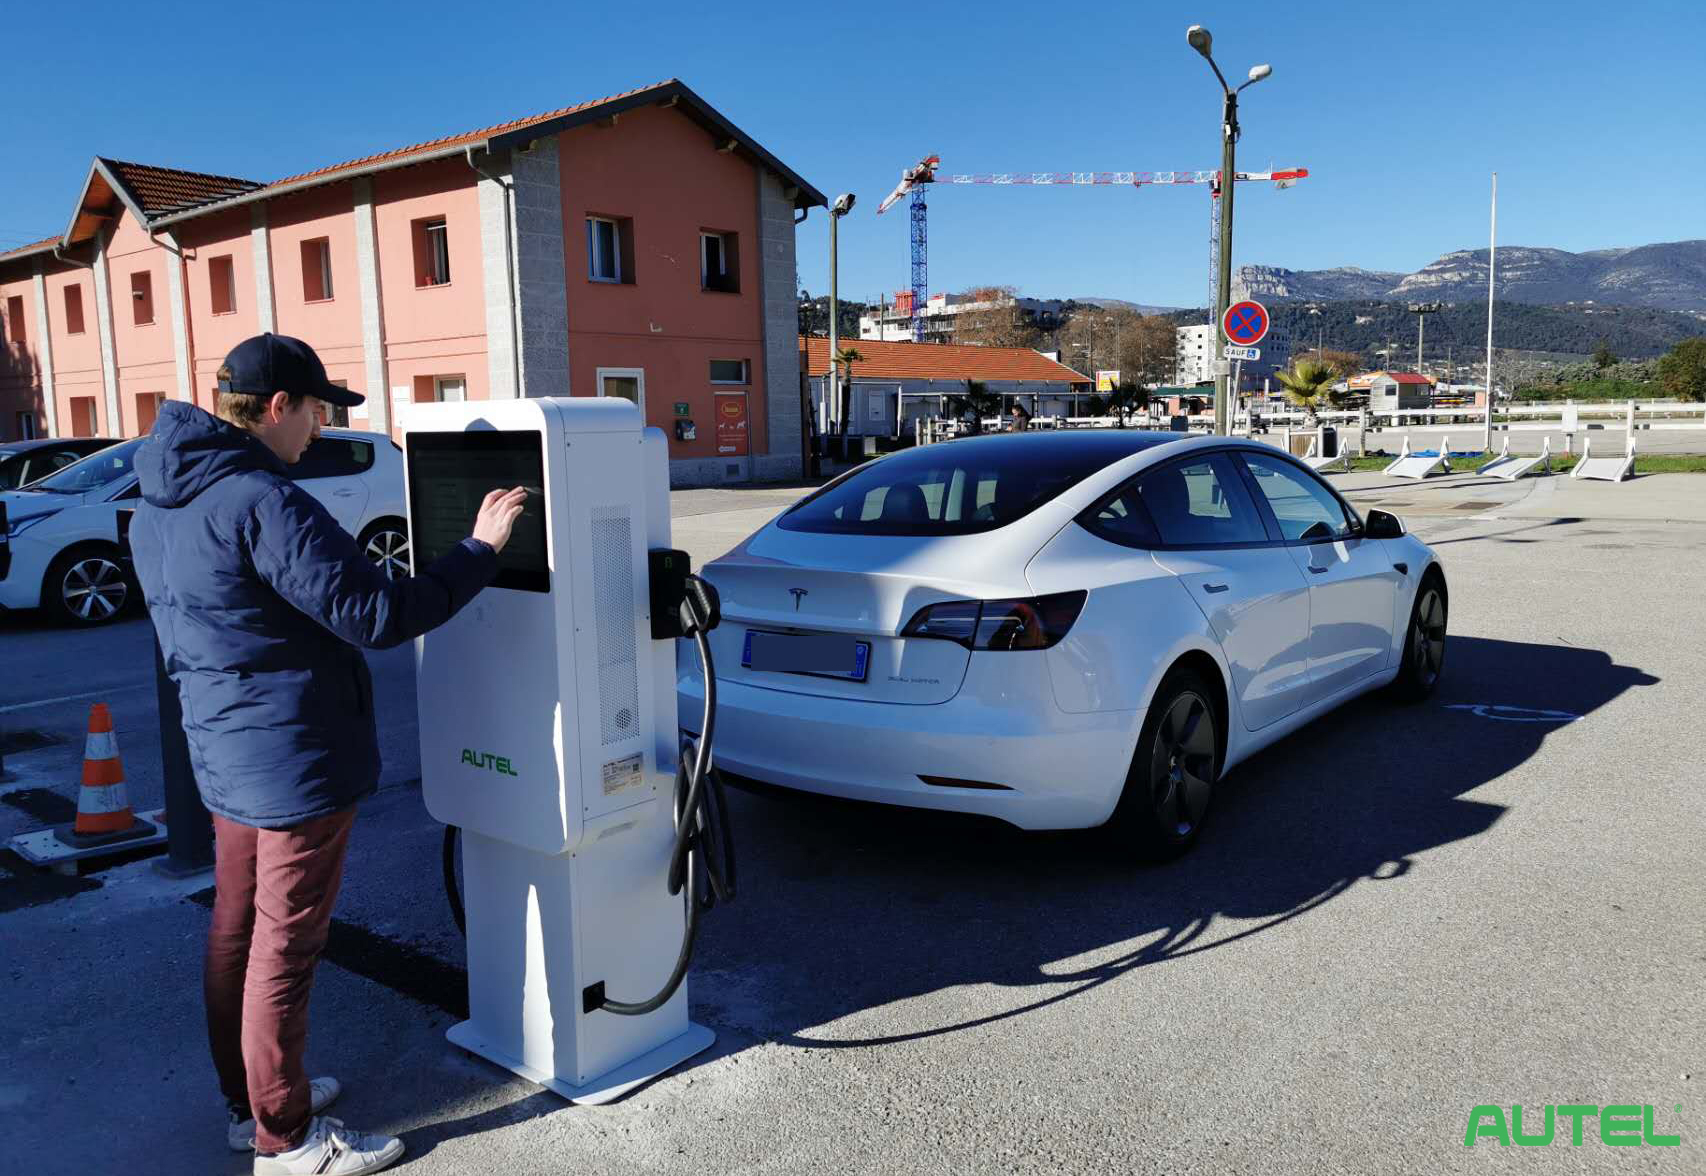 Autel continues its rapid expansion of DC Chargers with France being the  first country with DC Compact installed and in operation